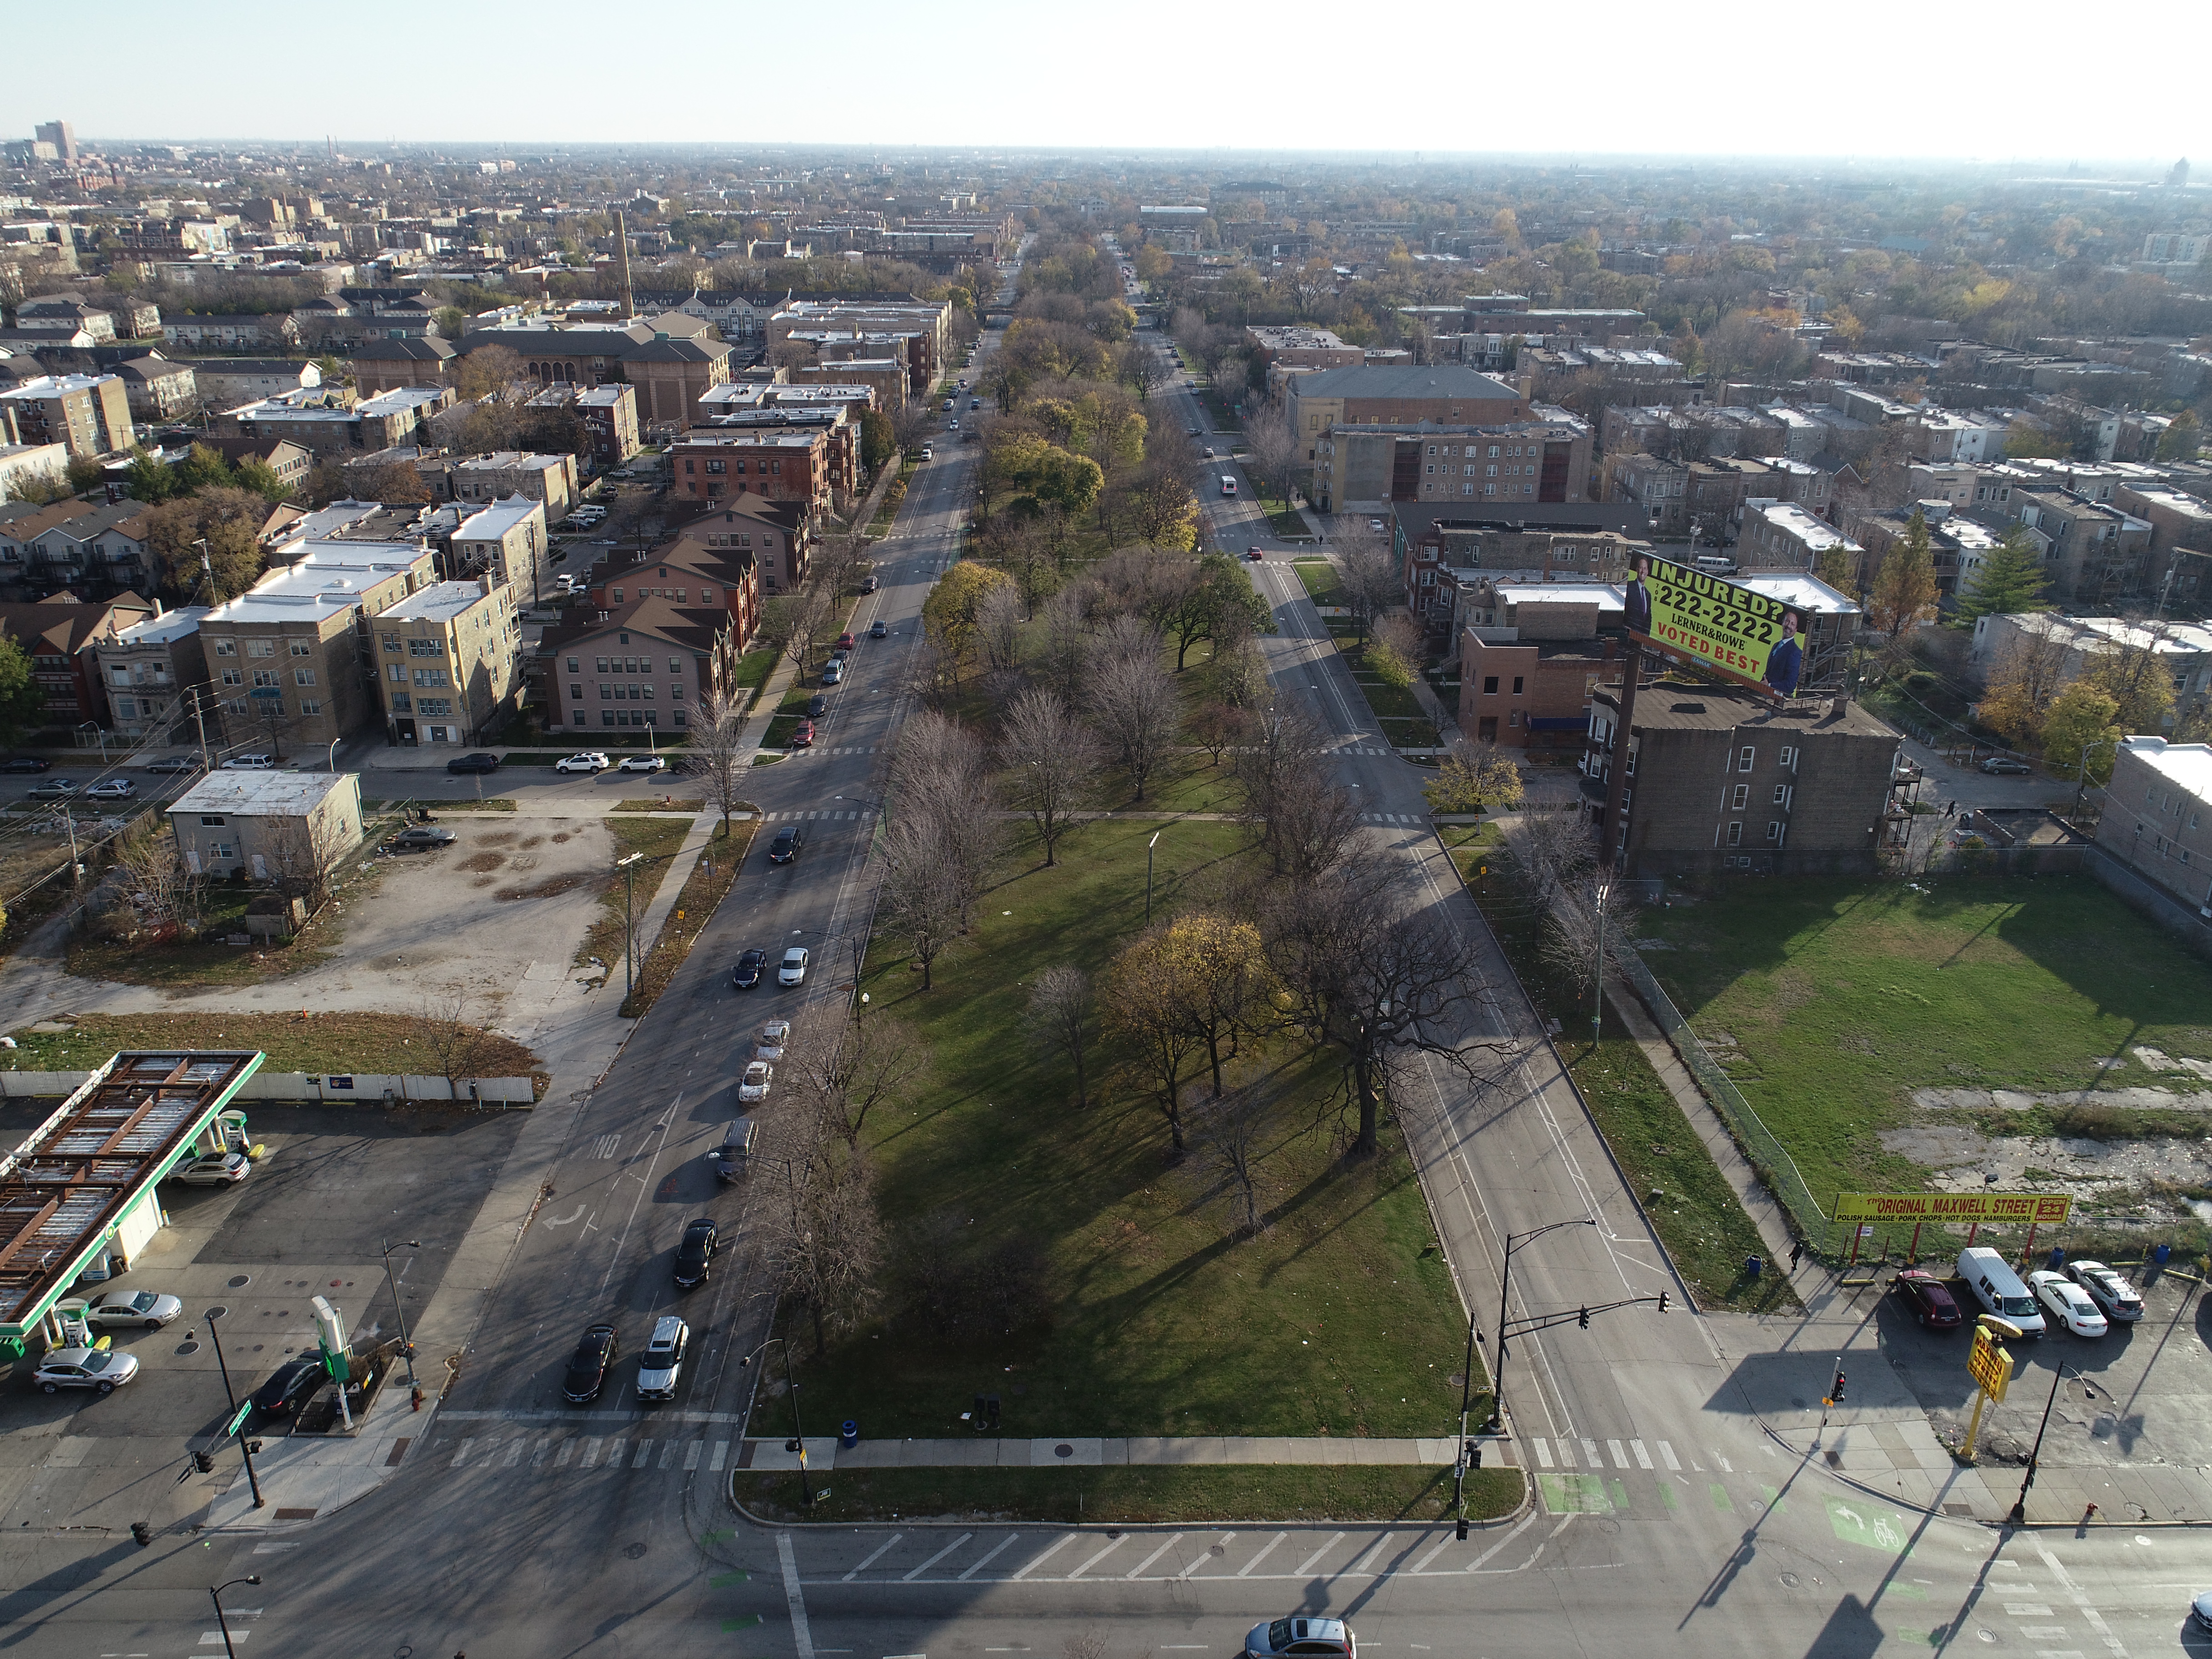 Aerial view of boulevard with large central green space and street surrounding on both sides.